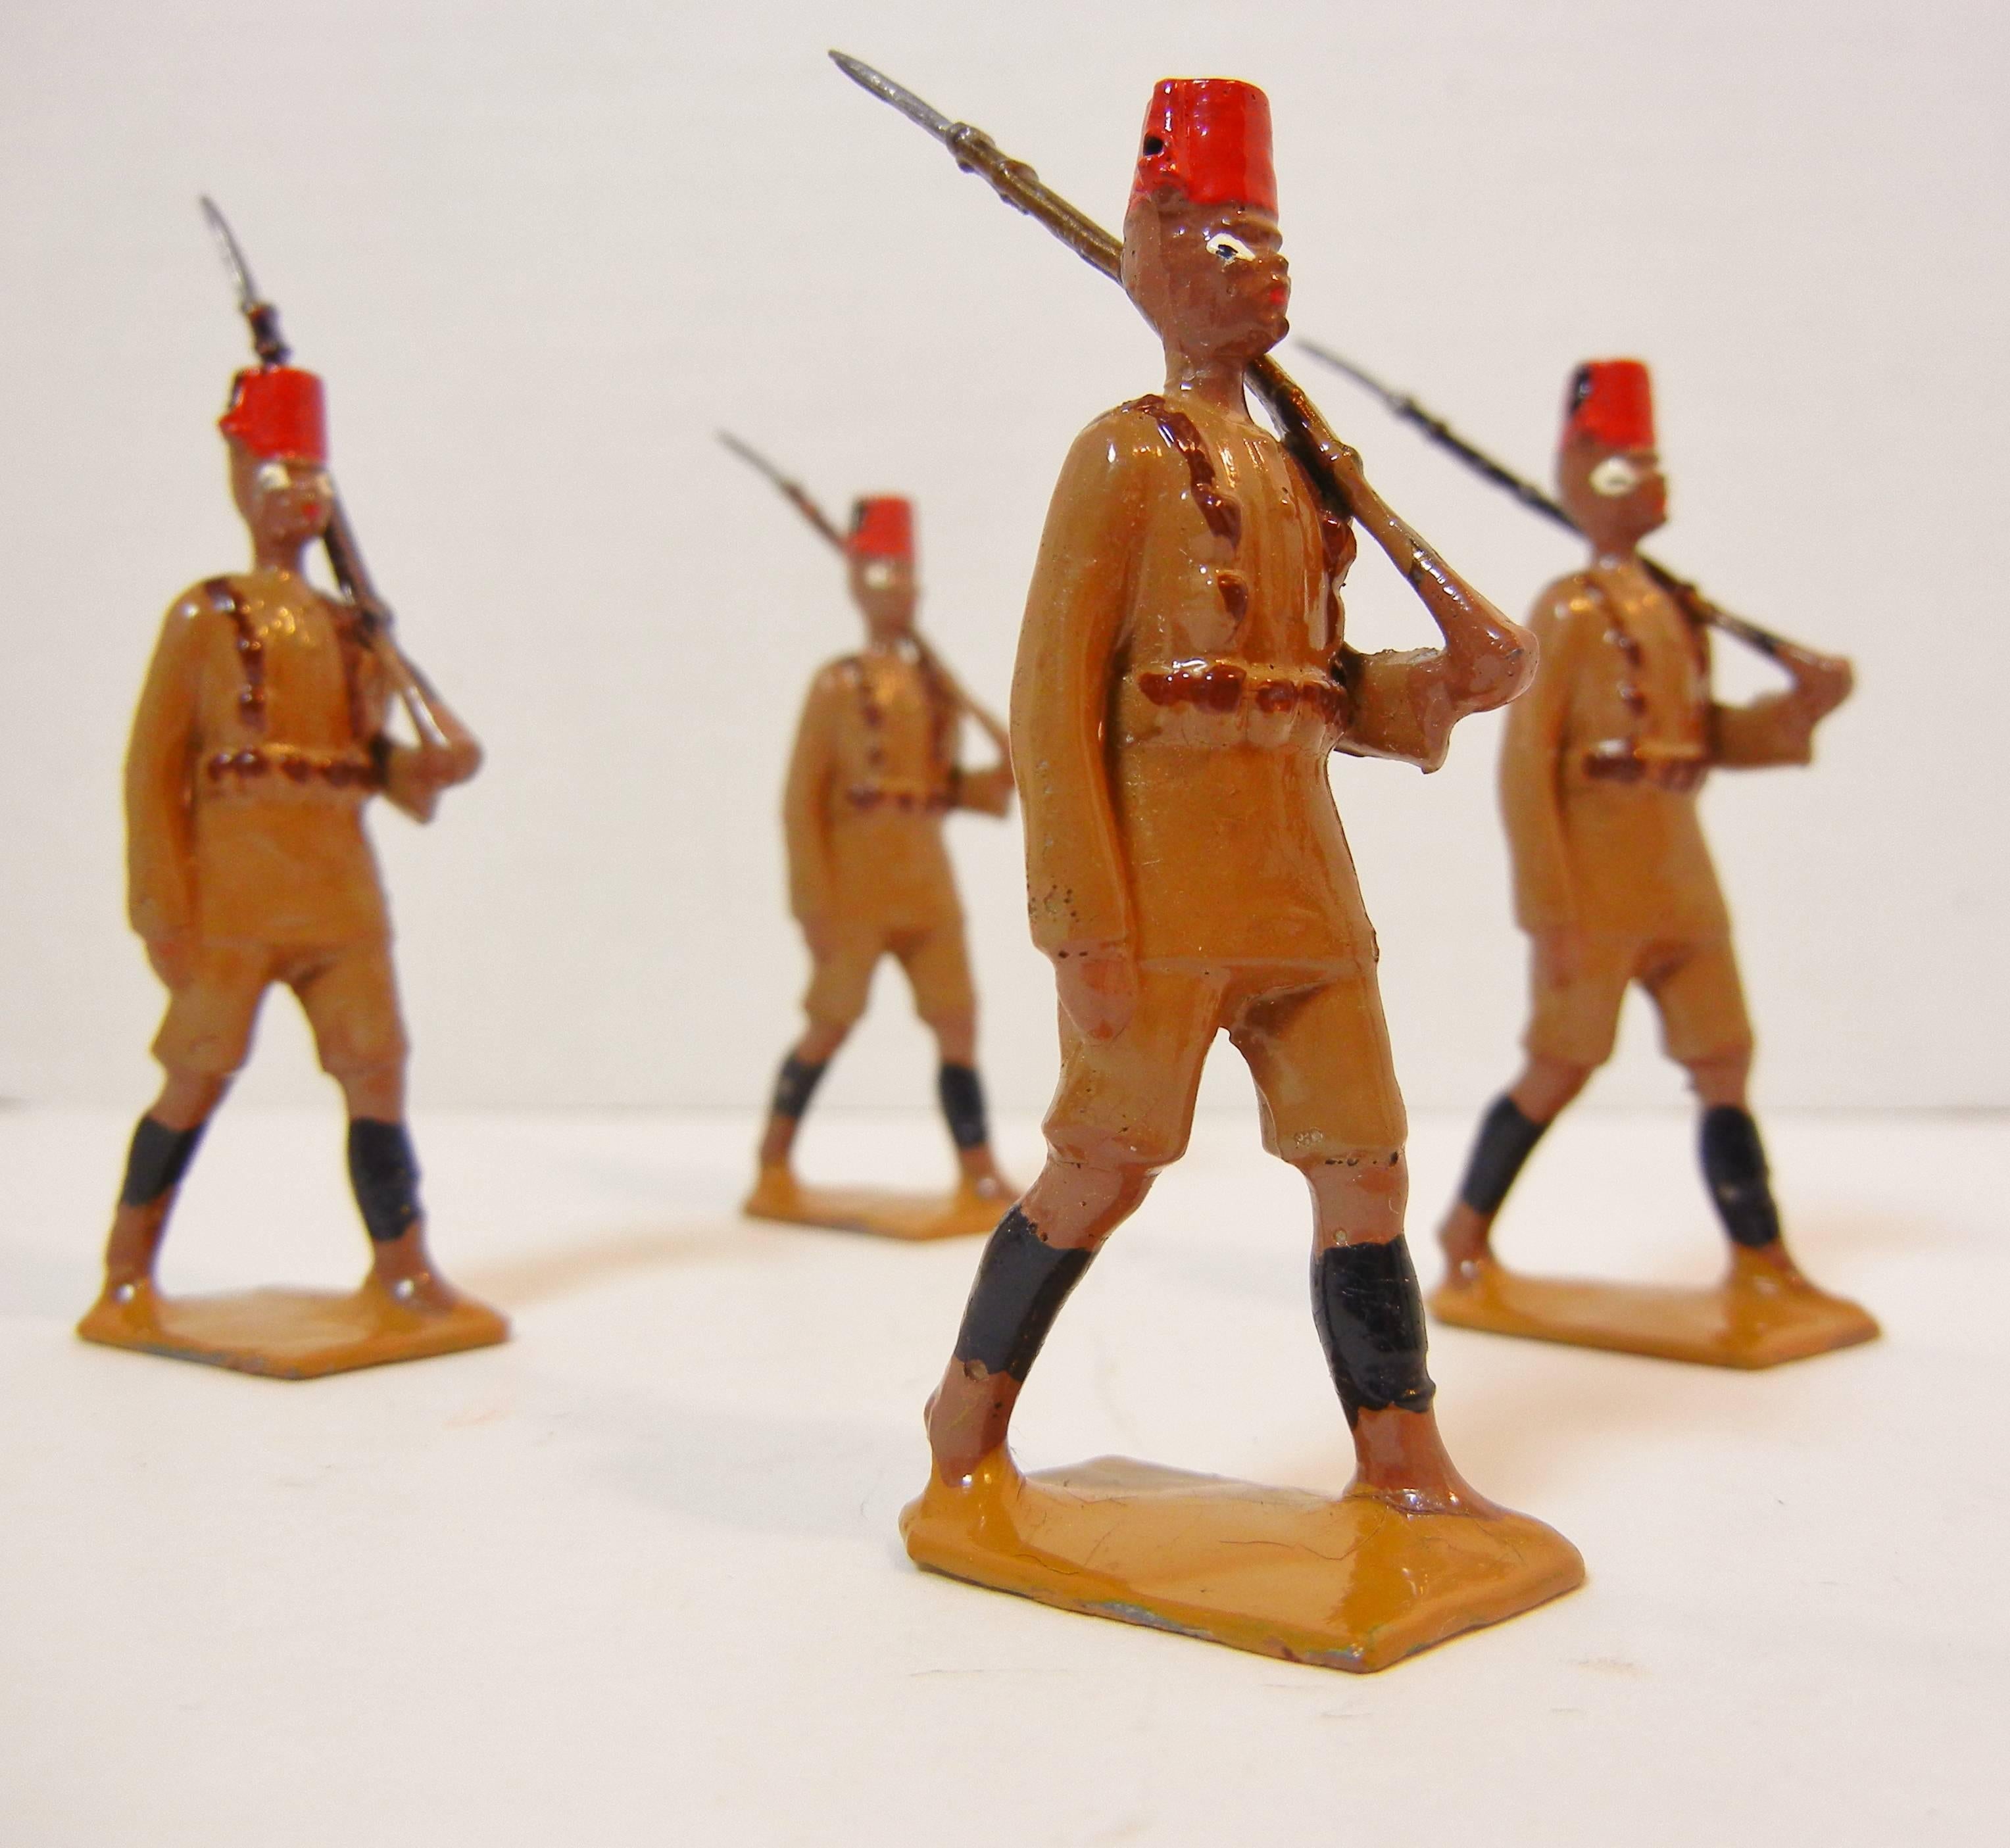 Edwardian King's African Rifles, Vintage Toy Soldiers by W. Britain Ltd